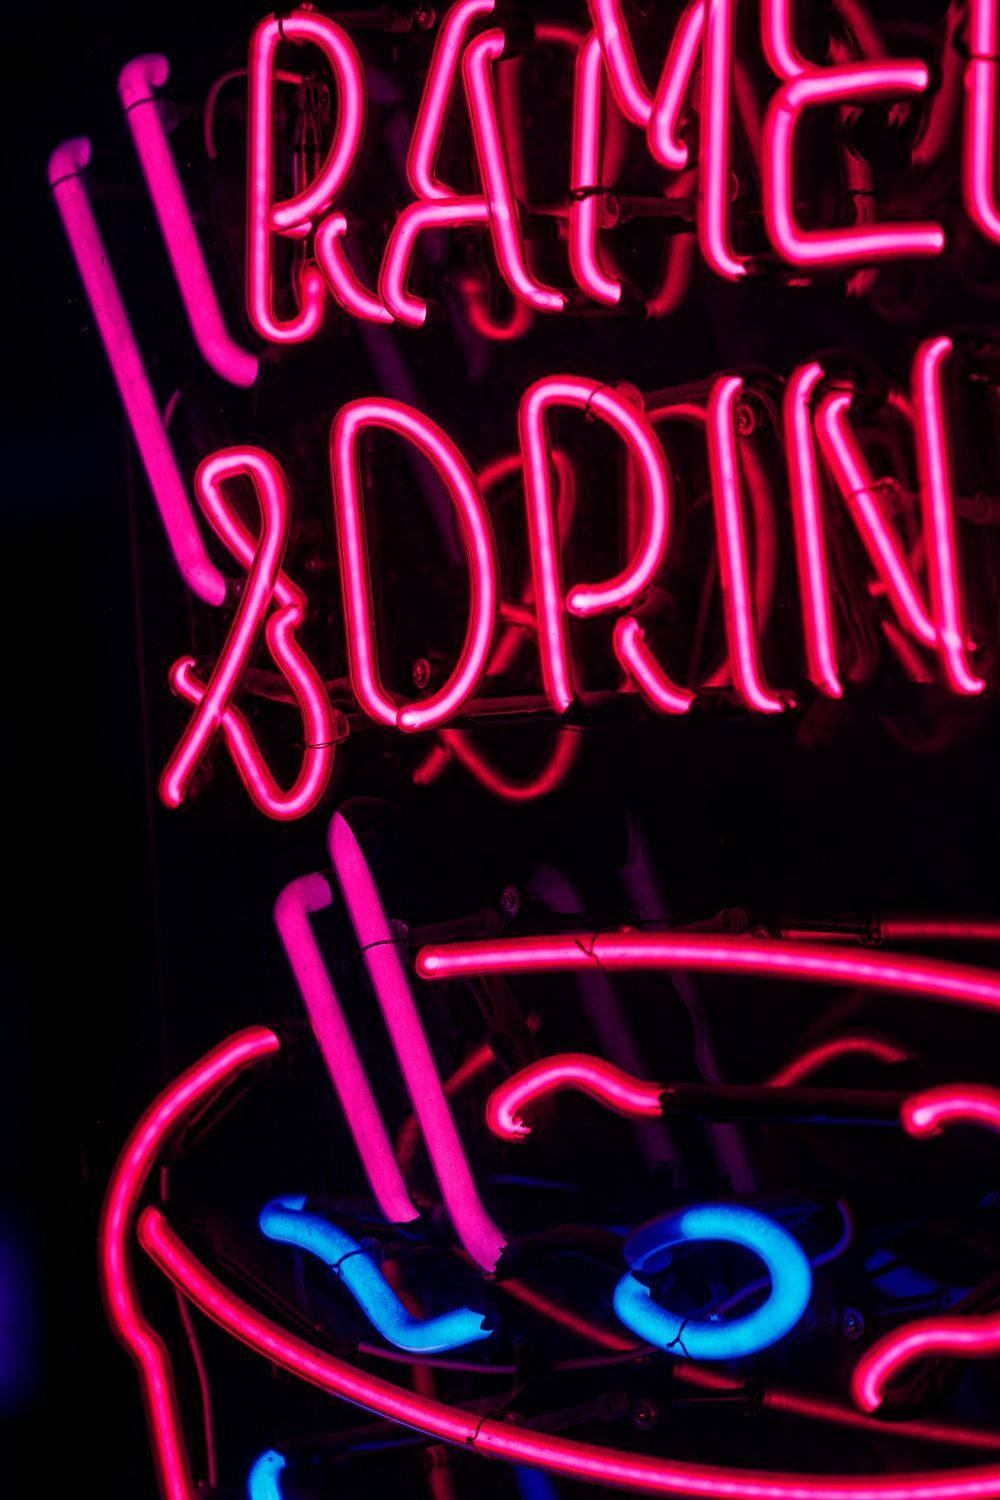 Feel the neon vibes - pink neon aesthetic Wallpaper